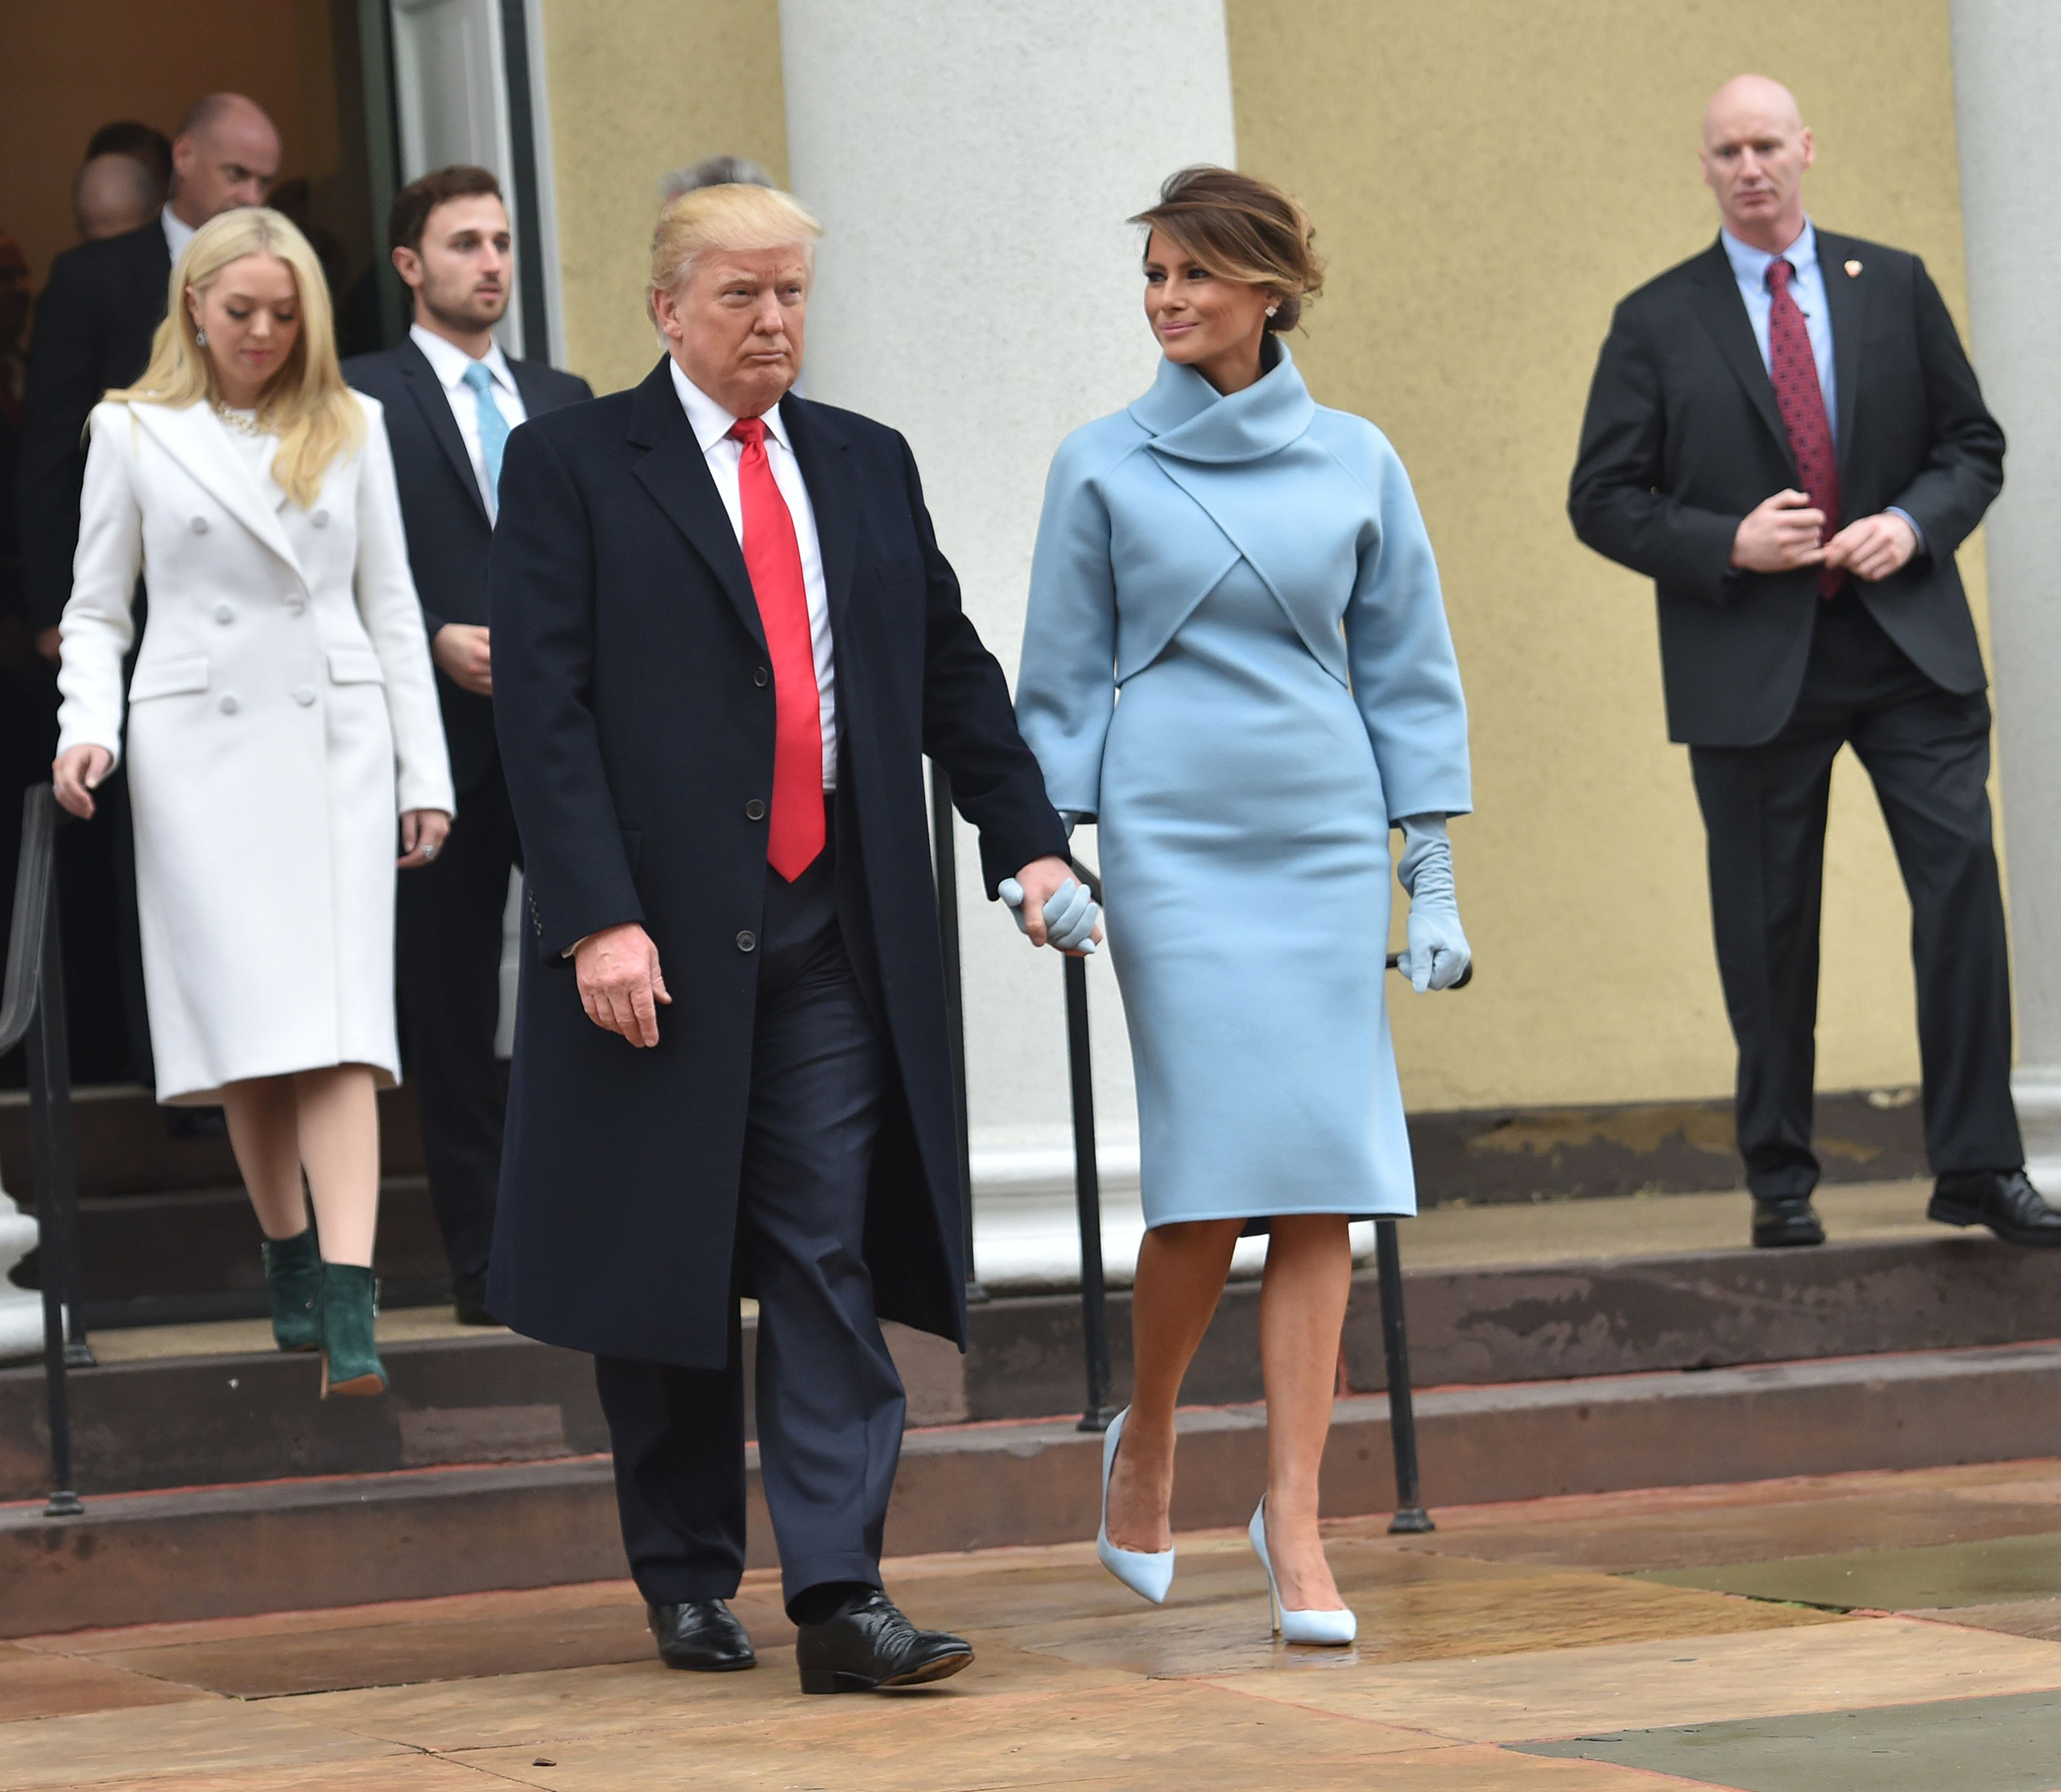 US President-elect Donald Trump and his wife Melania leave St. John's Episcopal Church on Jan. 20, 2017, before Trump's inauguration. (Nicholas Kamm—AFP/Getty Images)